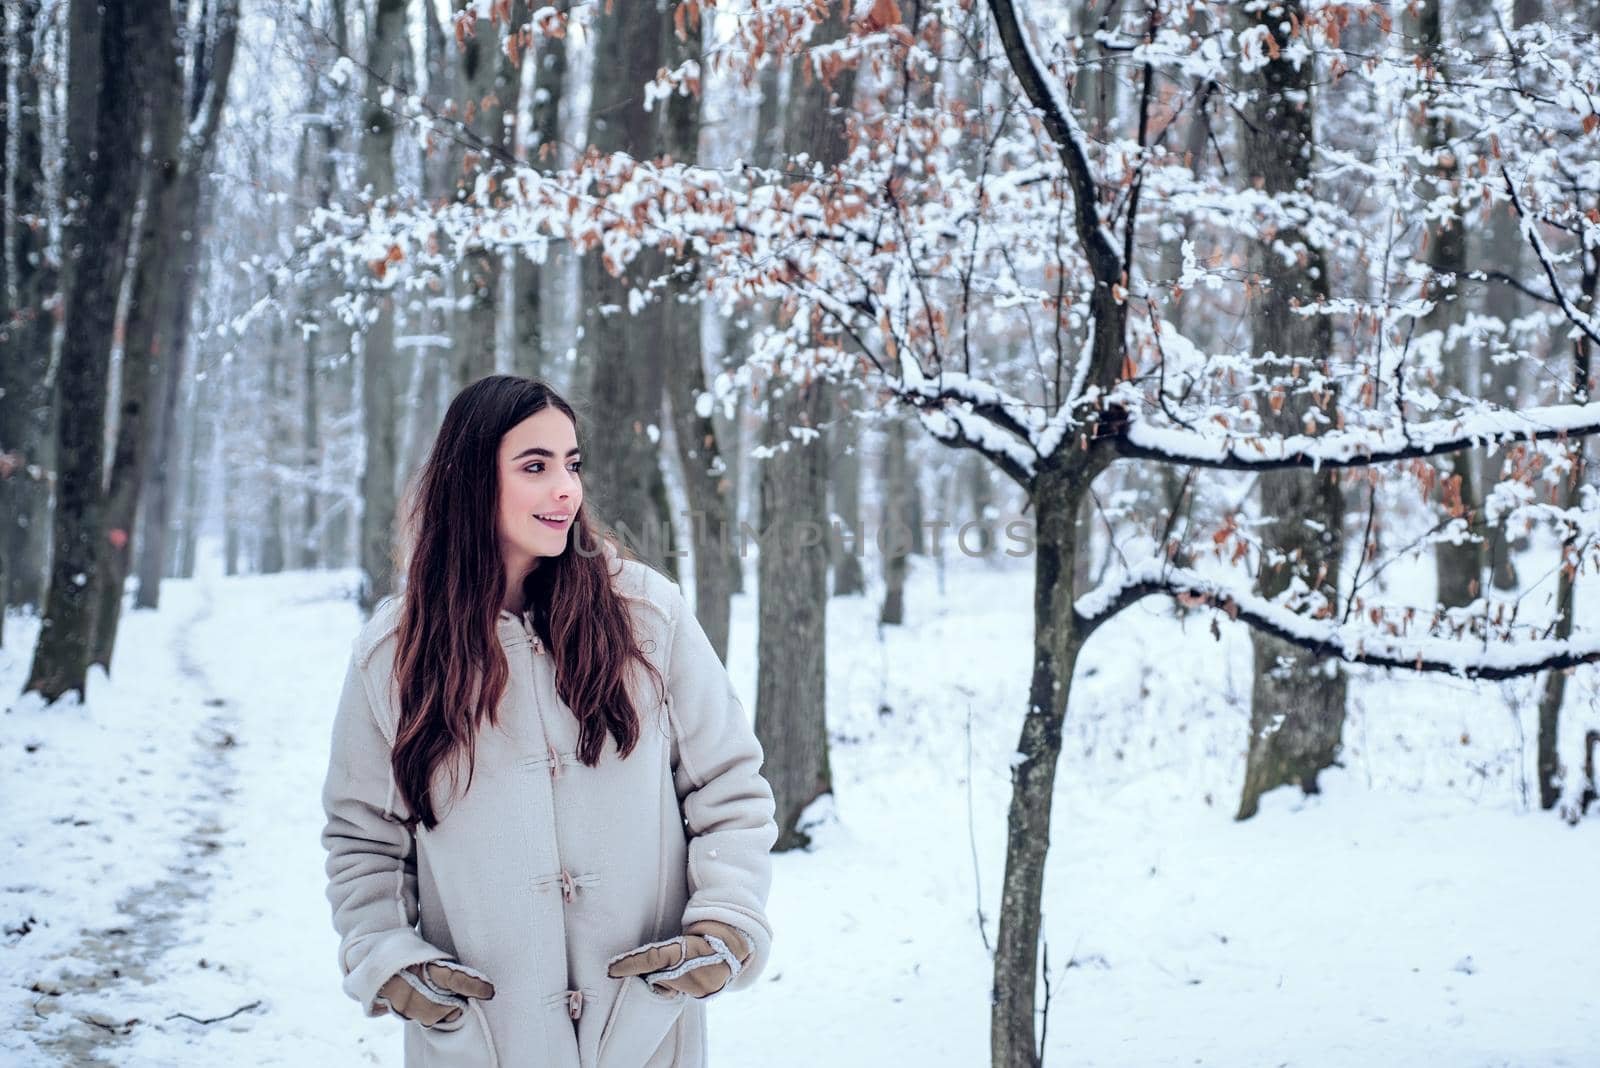 Winter woman. Portrait of a young woman in snow trying to warm herself. Beautiful girl in the winter forest in white down jacket. by Tverdokhlib